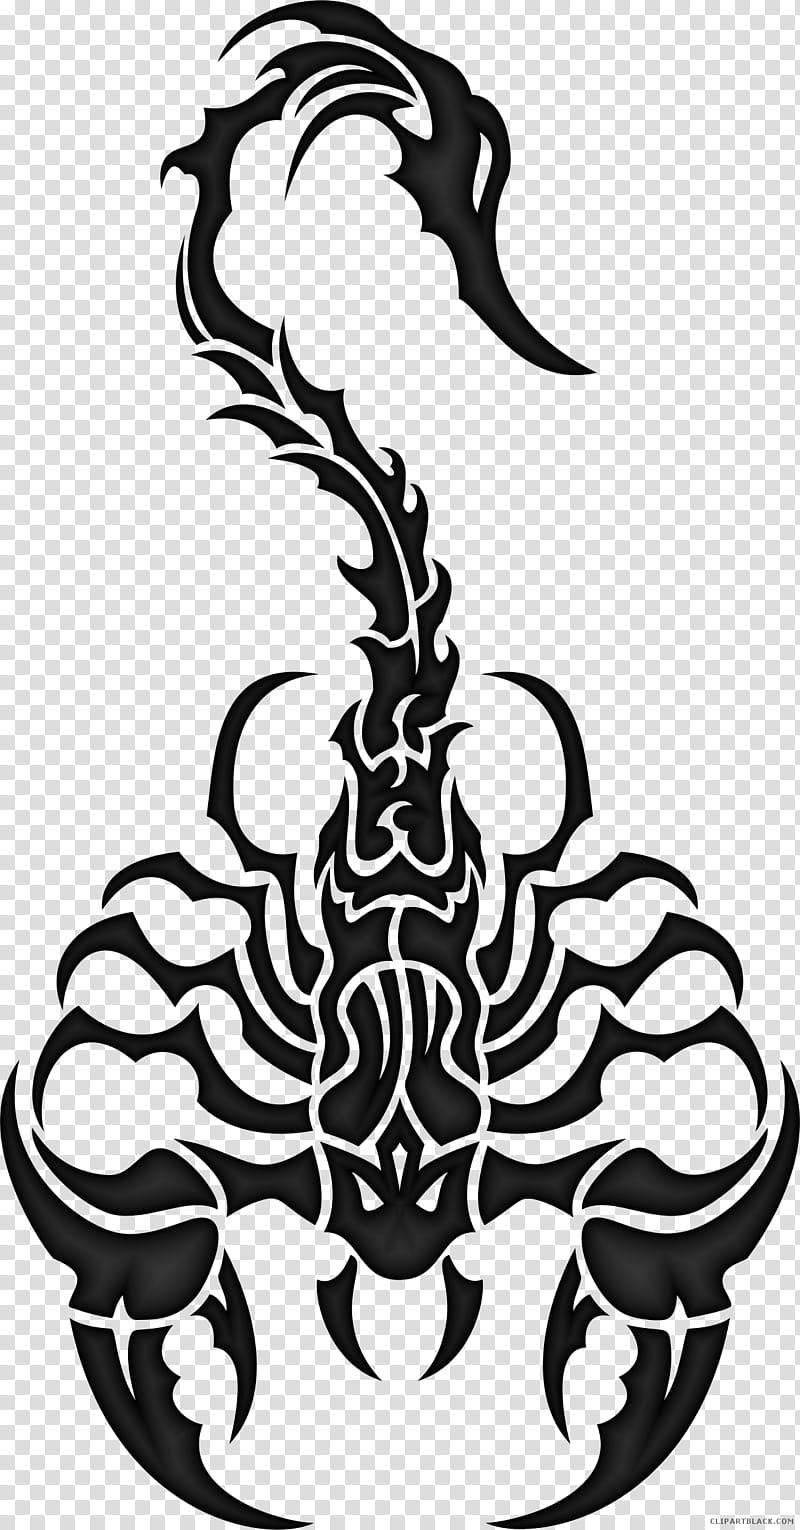 Scorpion Black And White, Drawing, Black And White
, Line Art transparent background PNG clipart